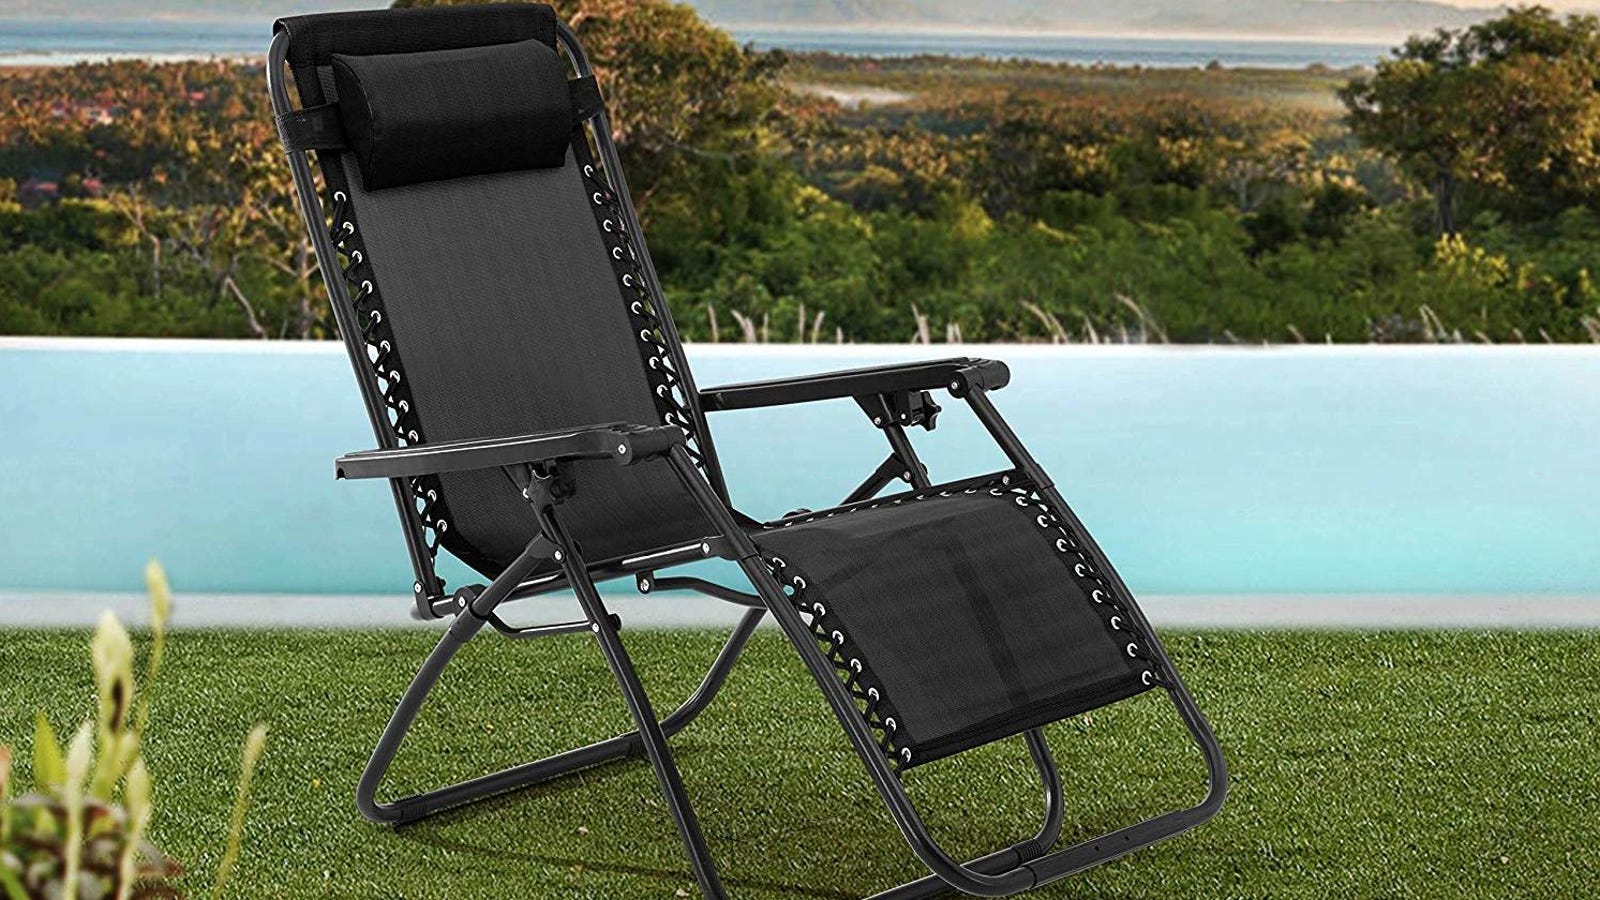 Sit Back, Relax, and Enjoy This Zero Gravity Chair For Just $30